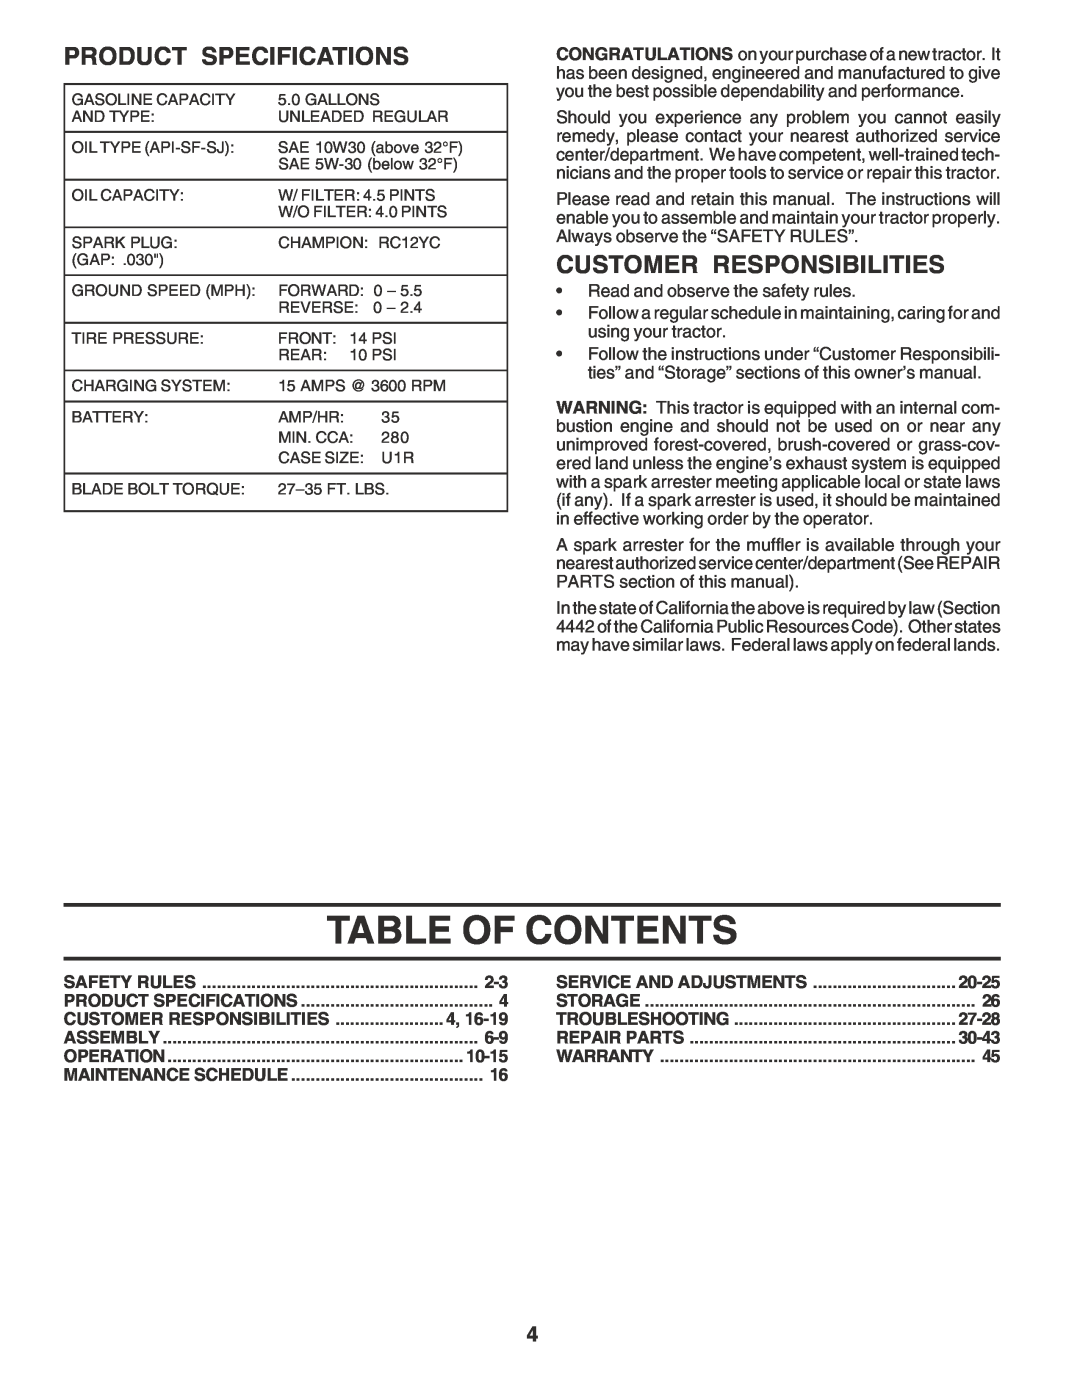 Husqvarna GTH2350 owner manual Table Of Contents, Product Specifications, Customer Responsibilities 